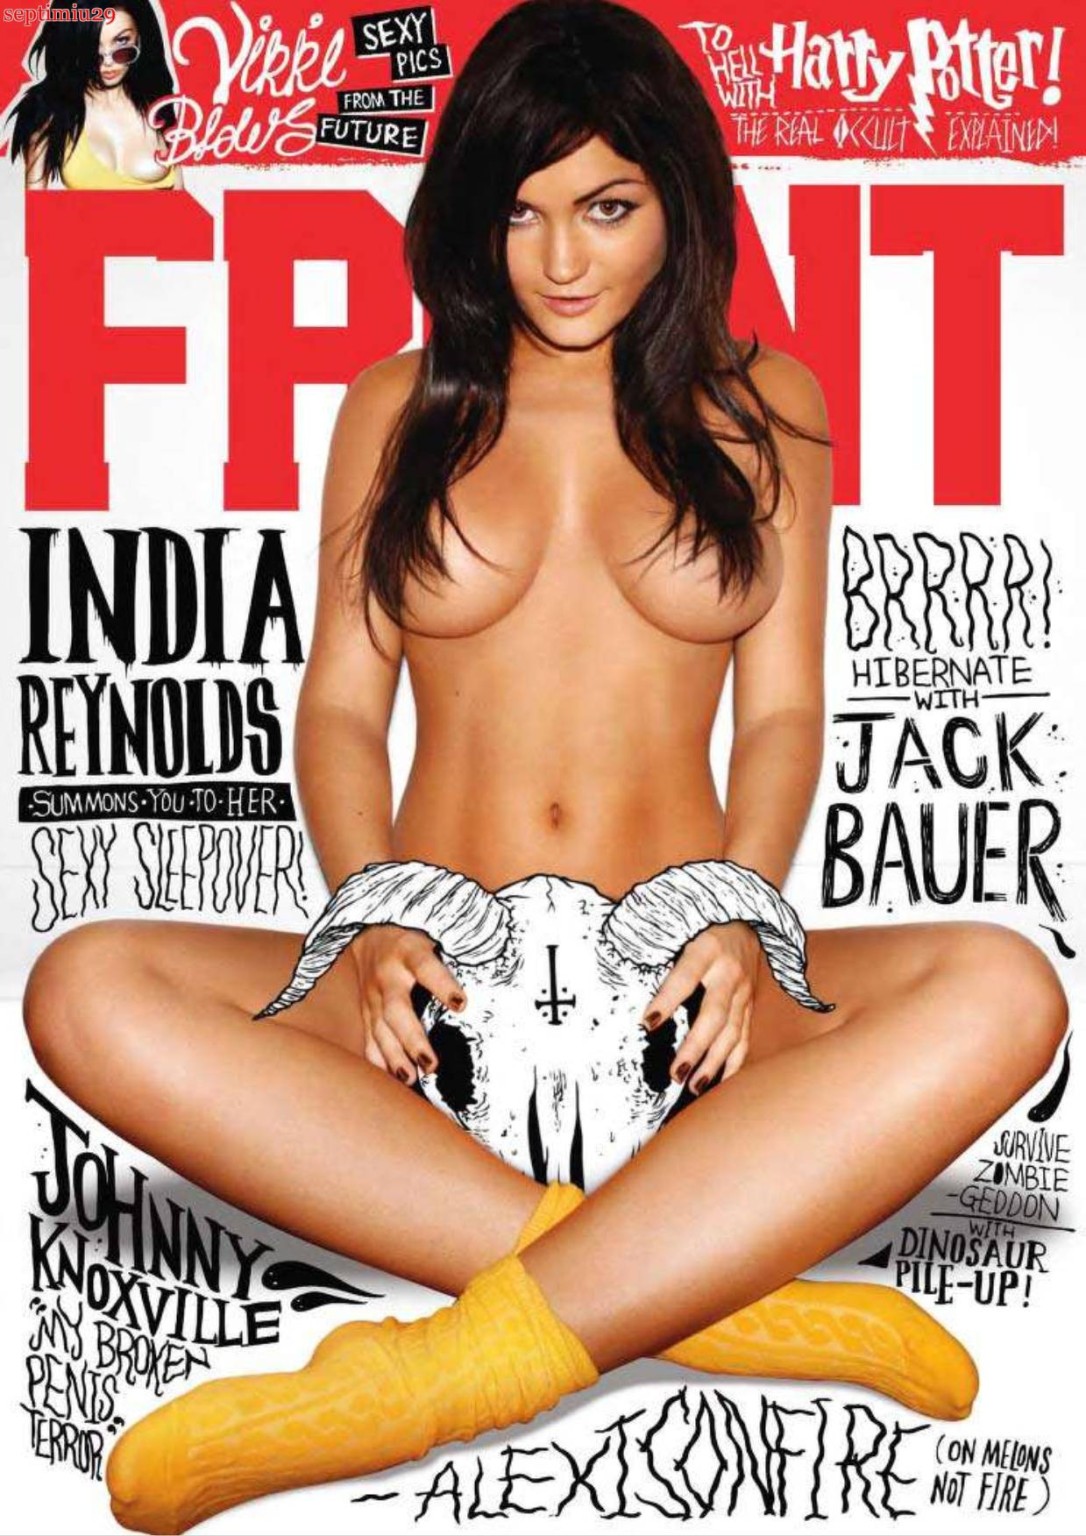 India Reynolds showing off her perfect boobs in Front UK magazine #75326654